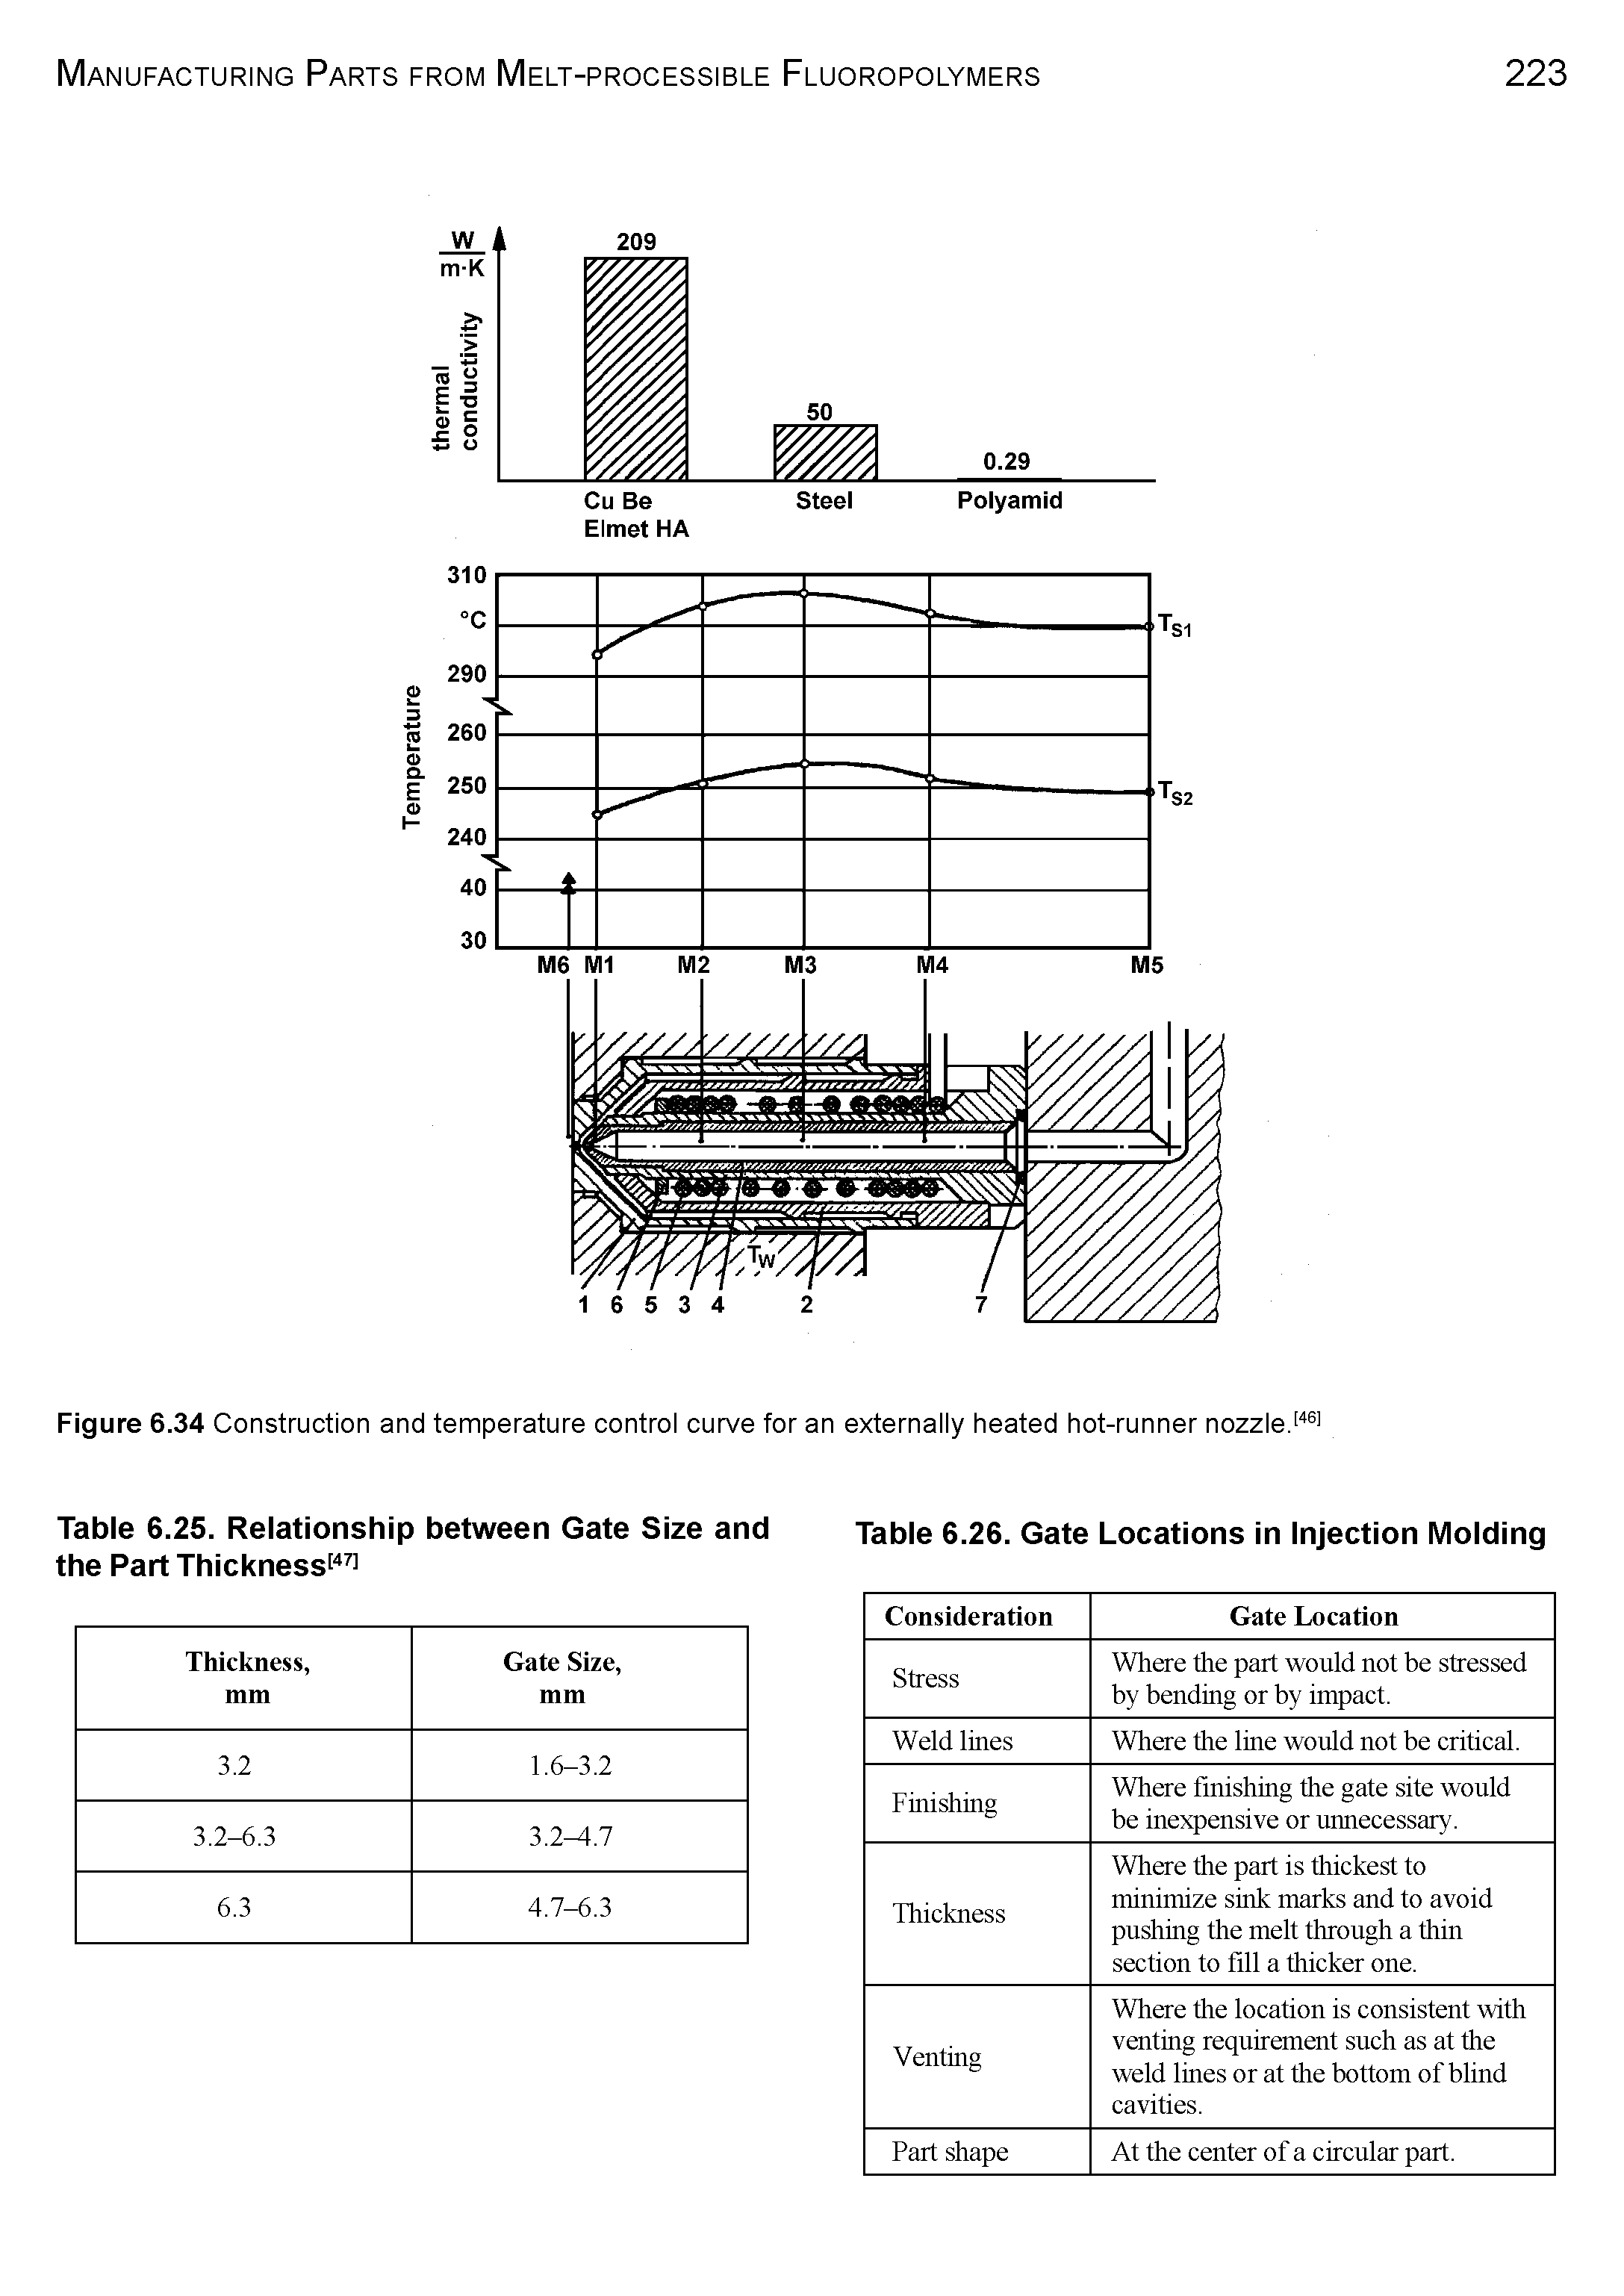 Figure 6.34 Construction and temperature control curve for an externally heated hot-runner nozzle.